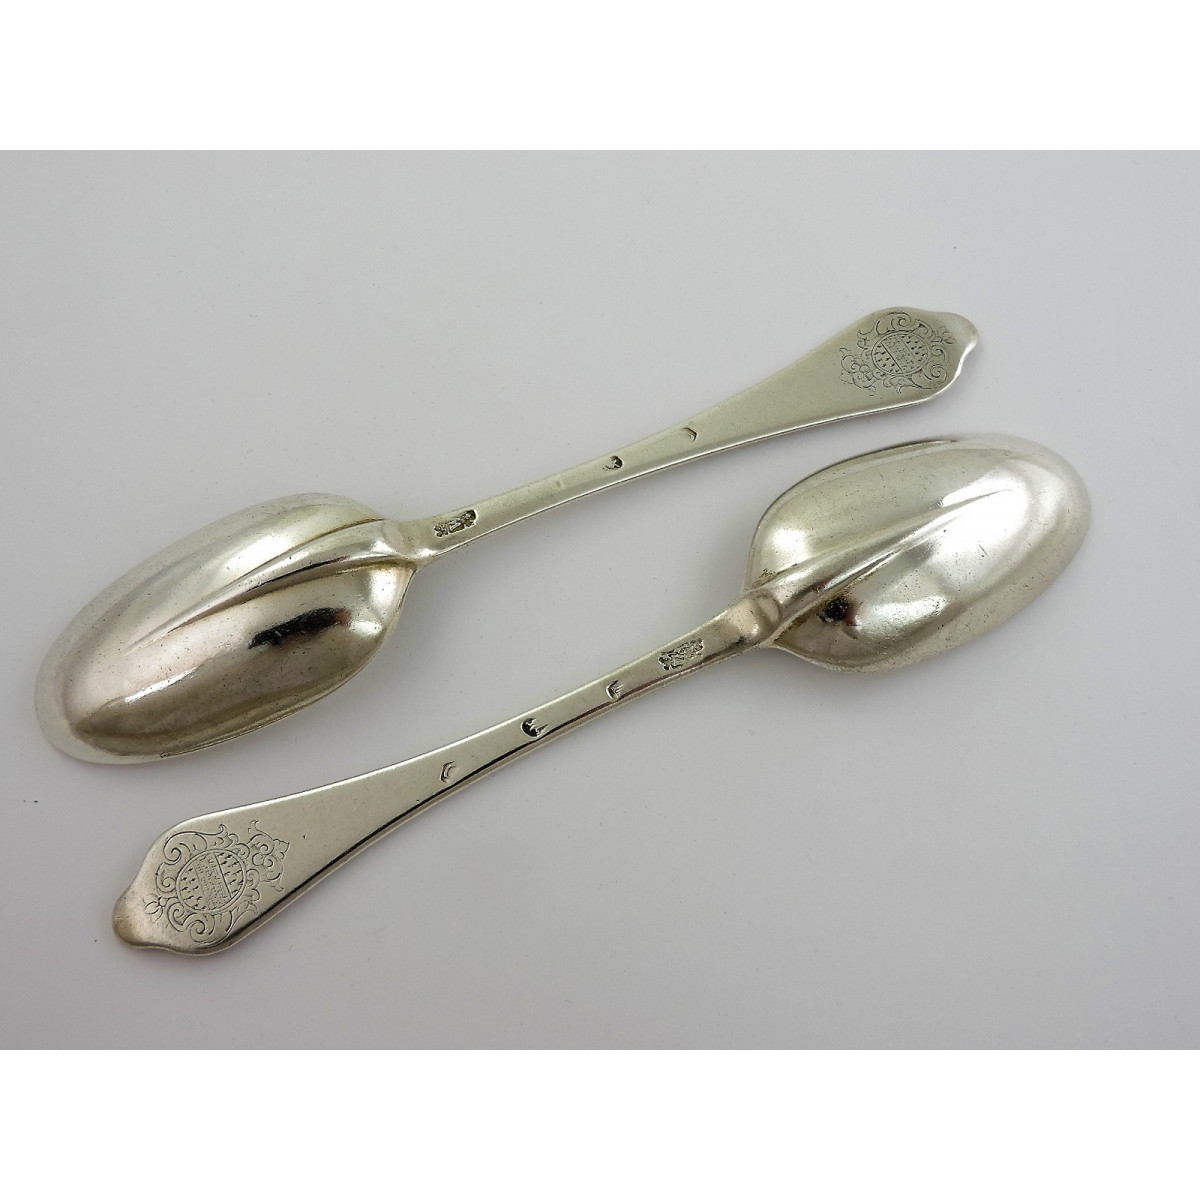 DOG NOSE with flowers DEMITASSE SPOON  1904 ENGLISH STERLING 